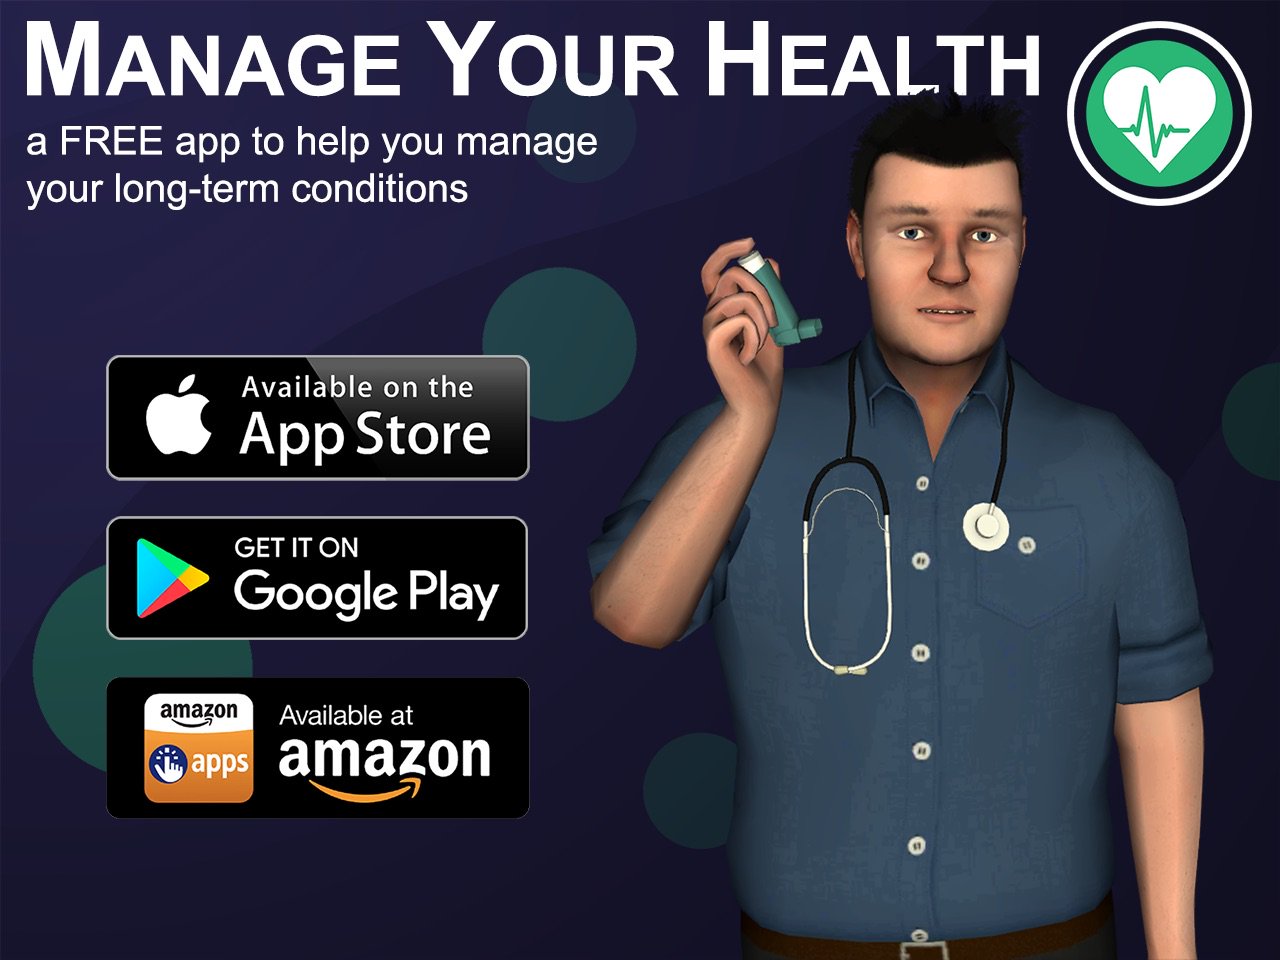 CCGs roll out self care app in partnership with School of Pharmacy featured image